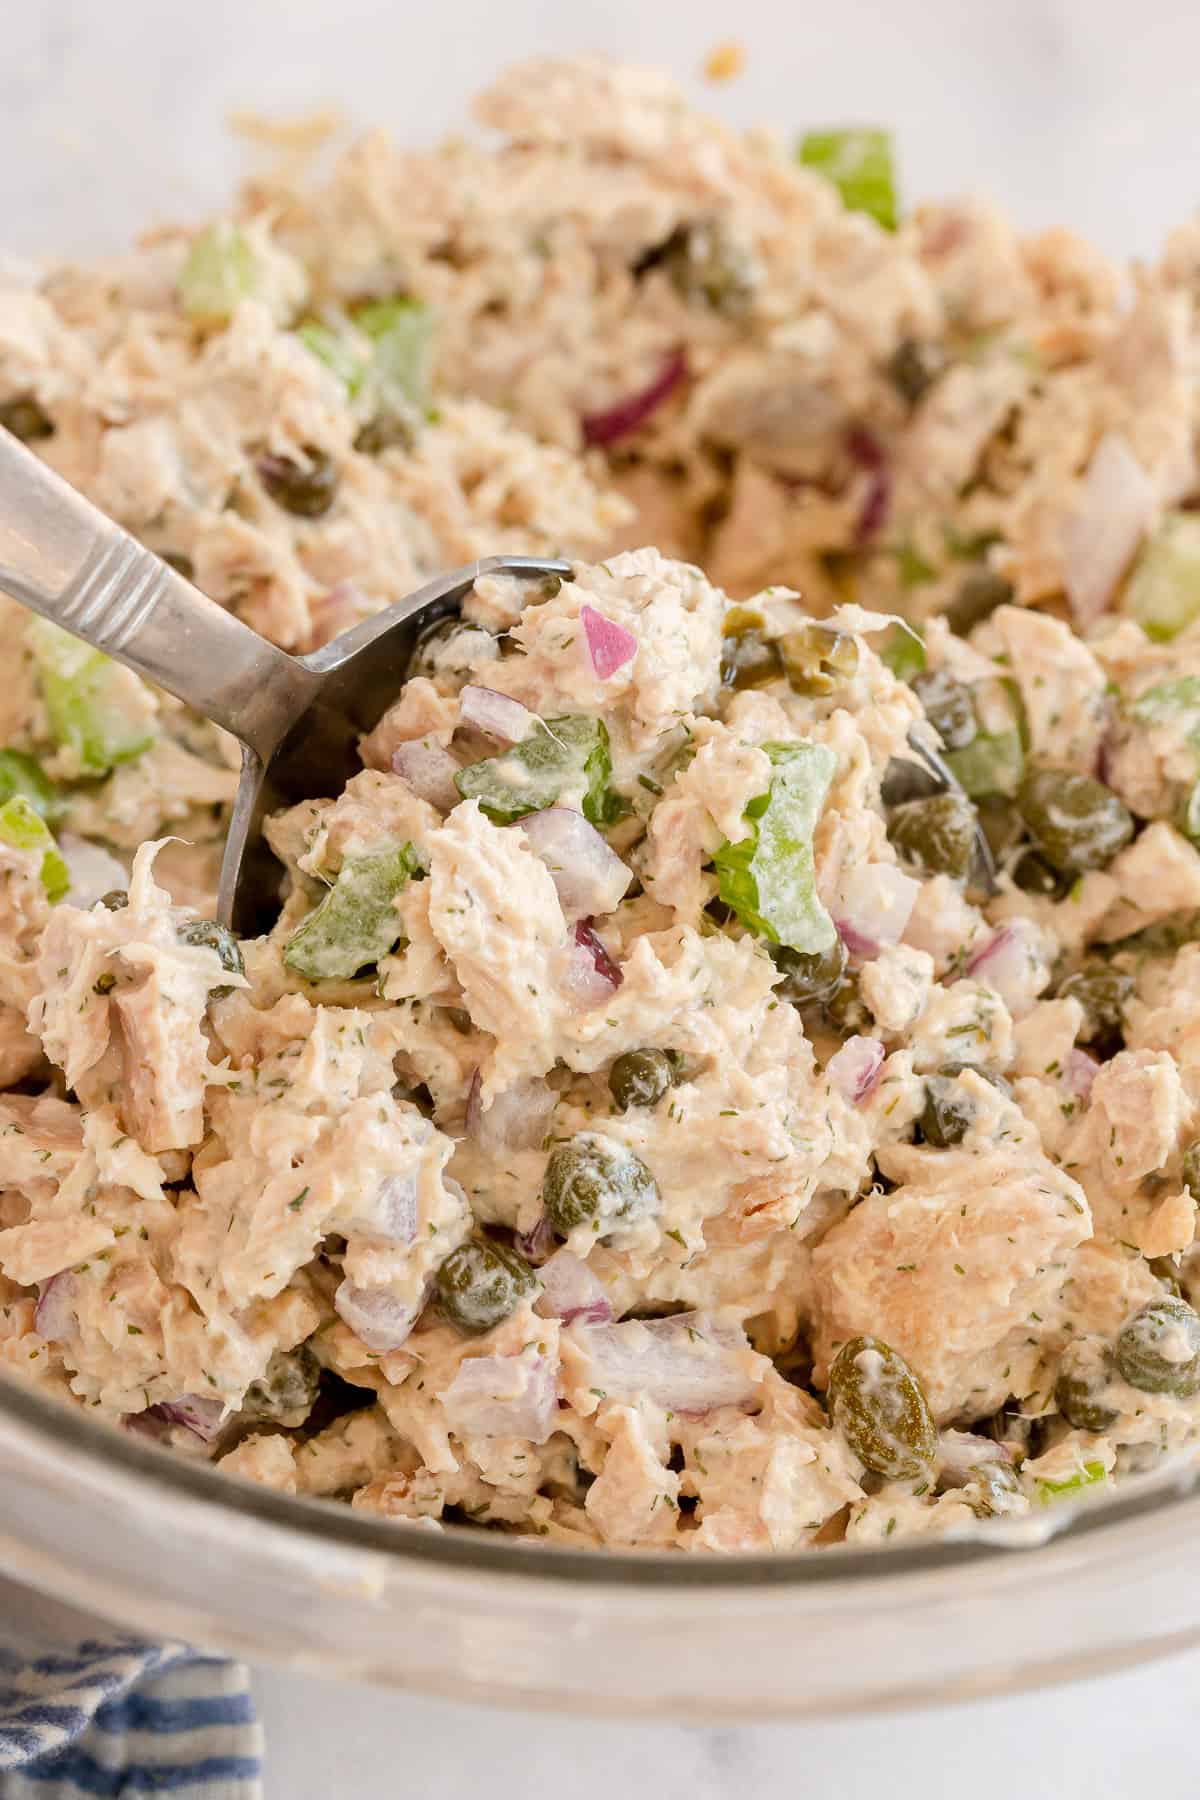 A close up of a spoon scooping tuna salad in a large bowl.